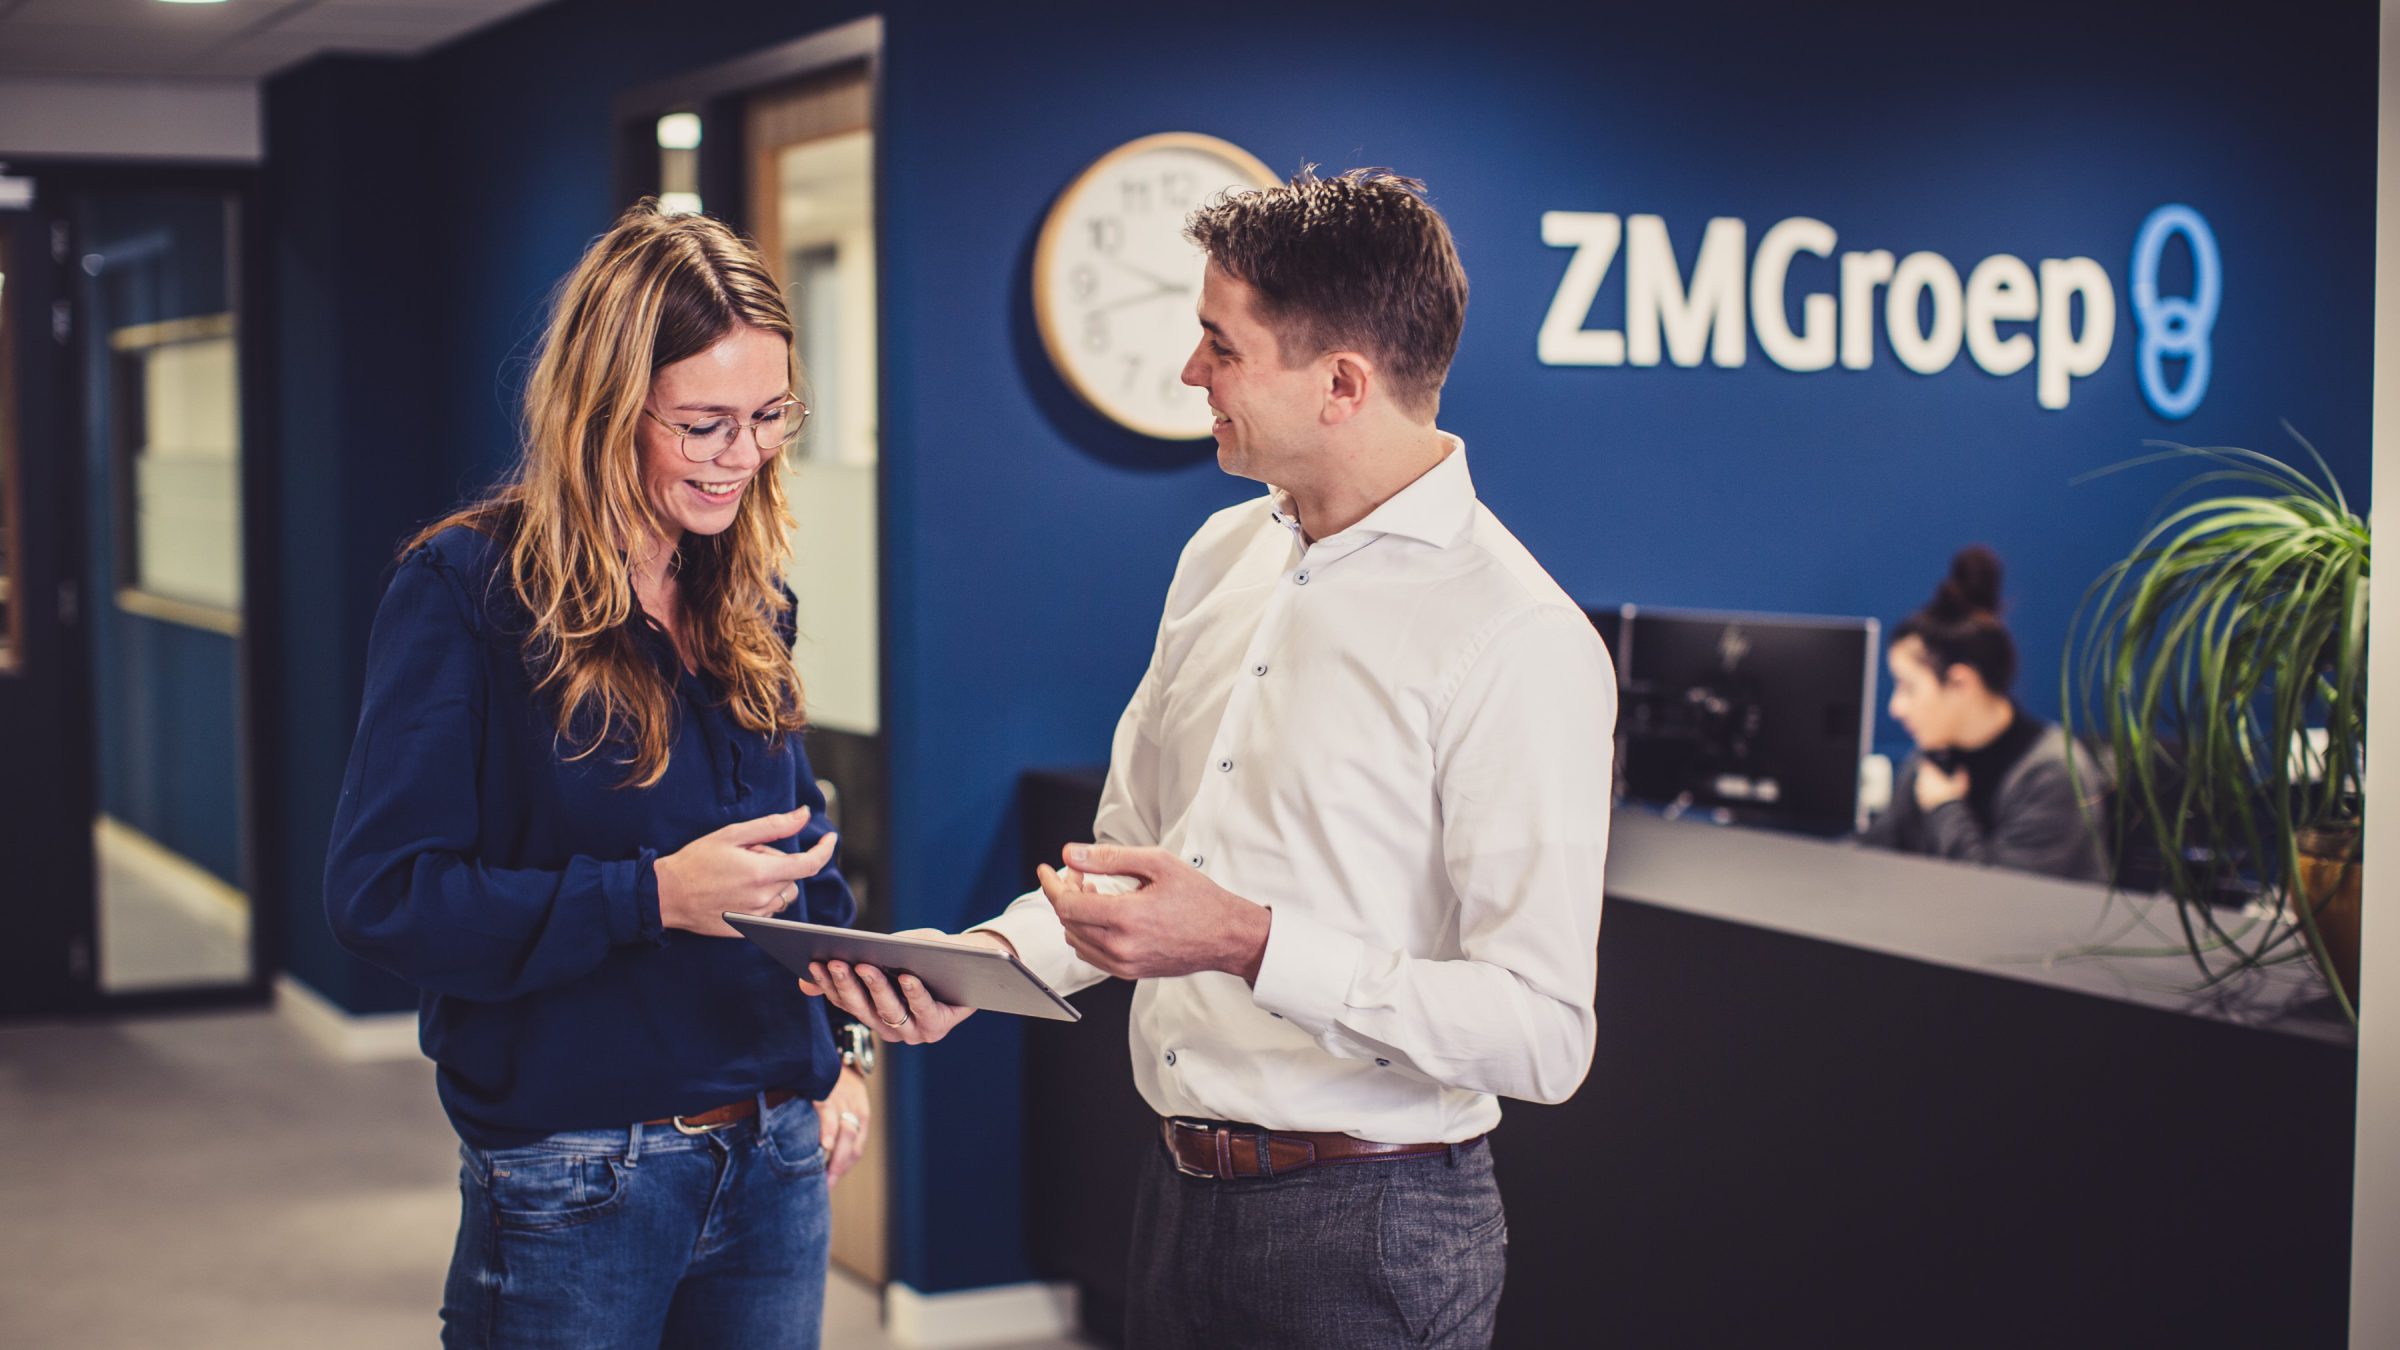 The reception of ZMGroup